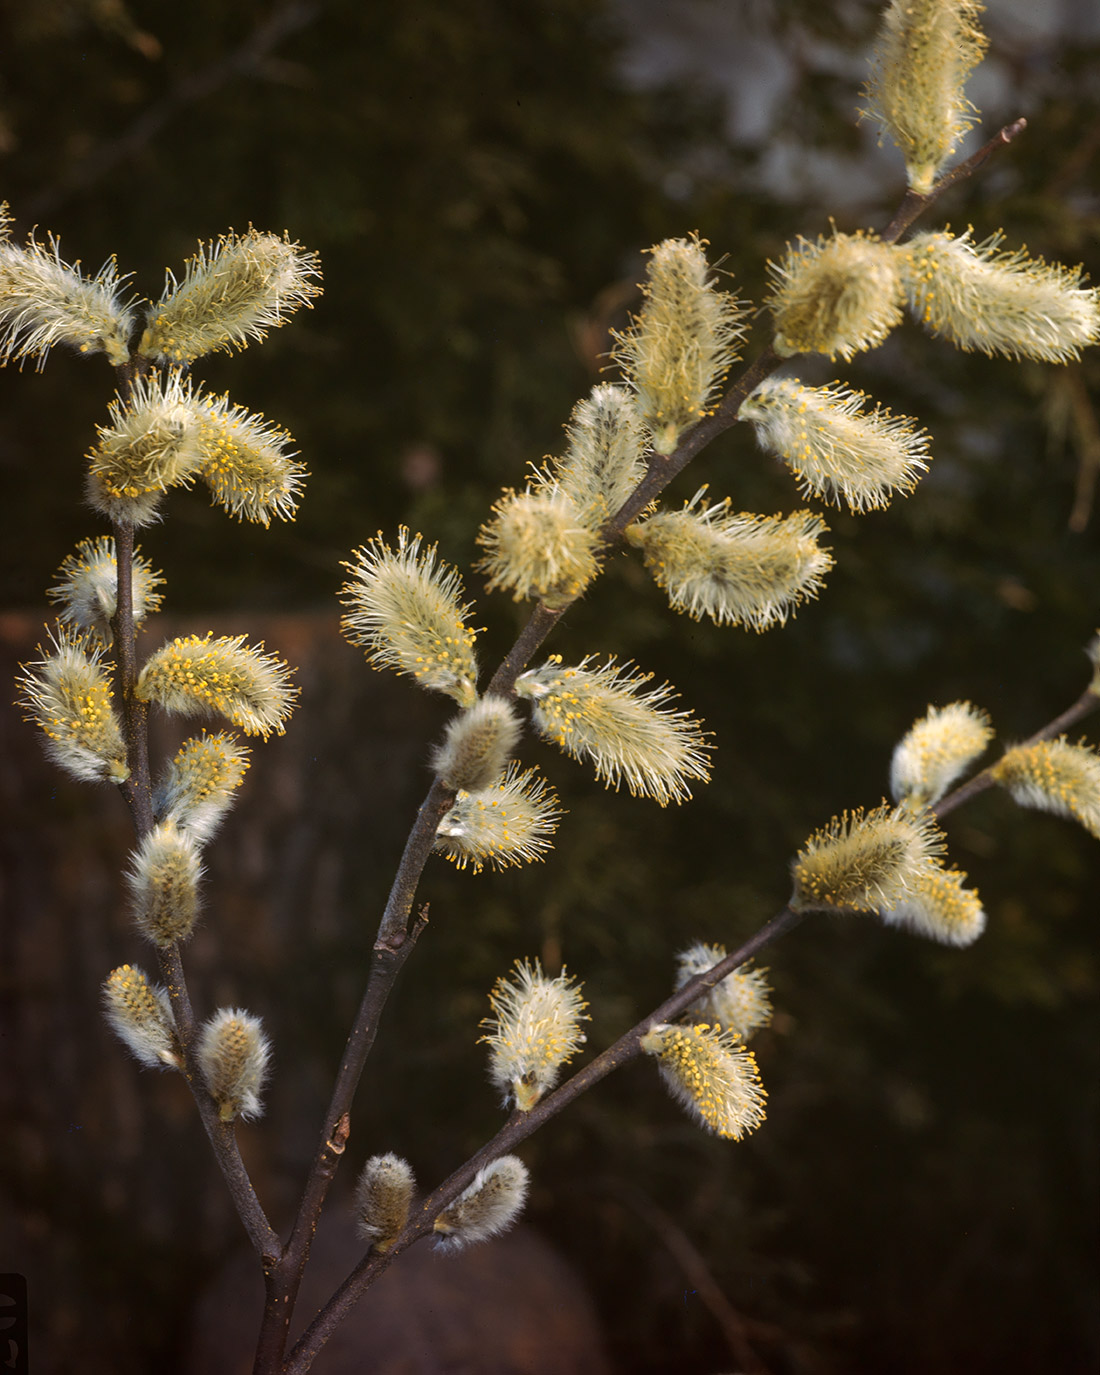 Mature catkins of a willow